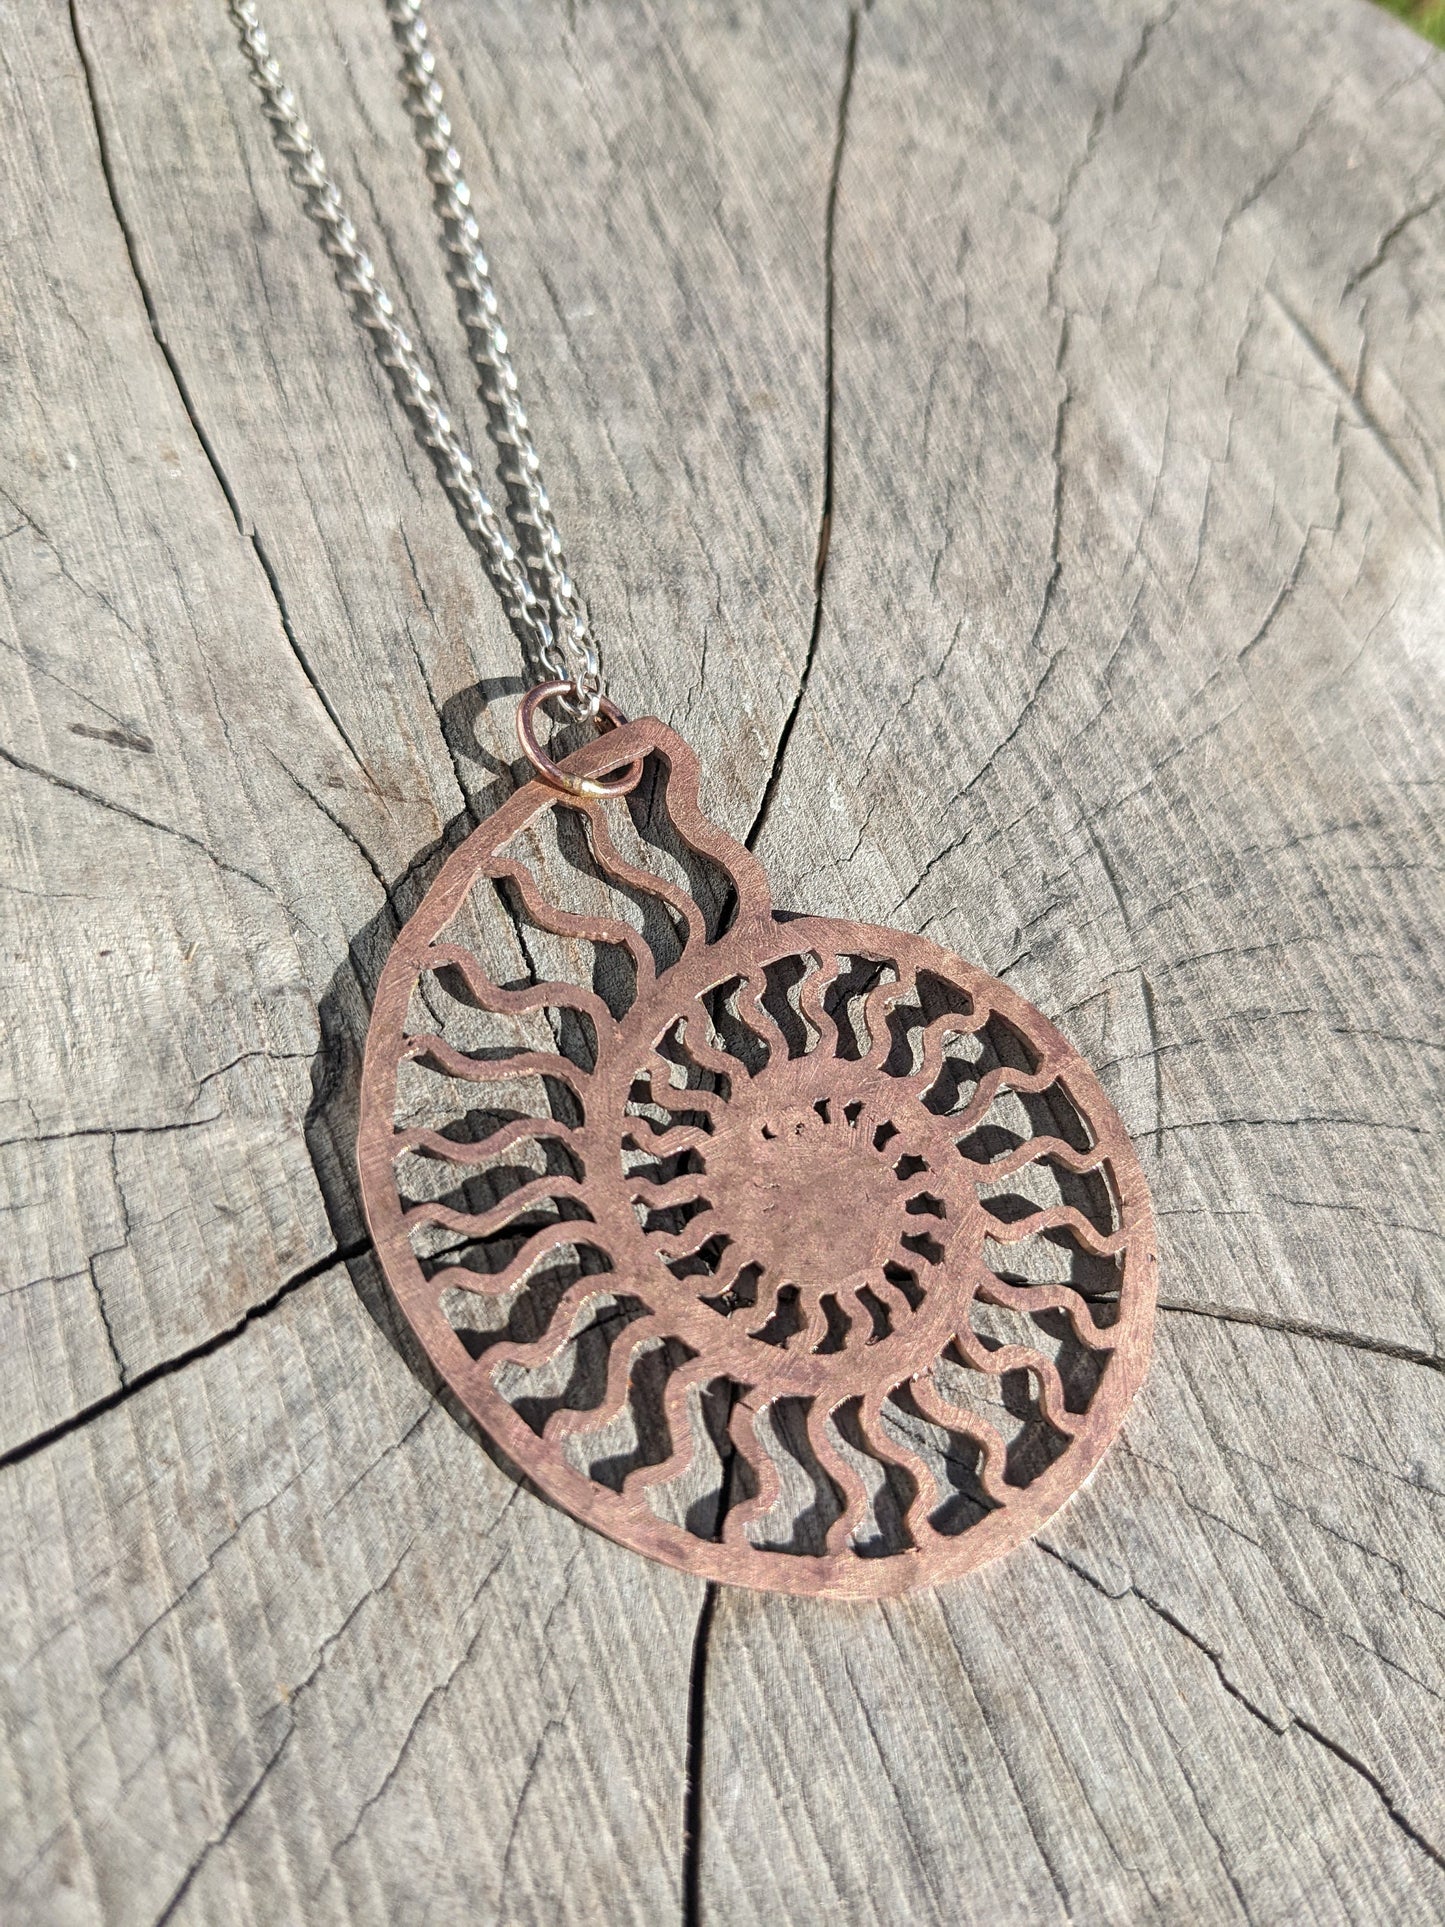 Ammonite Pendant in Bronze with Silver Chain - Nautilus Fossil Seashell Necklace Hand Hammered Jewelry